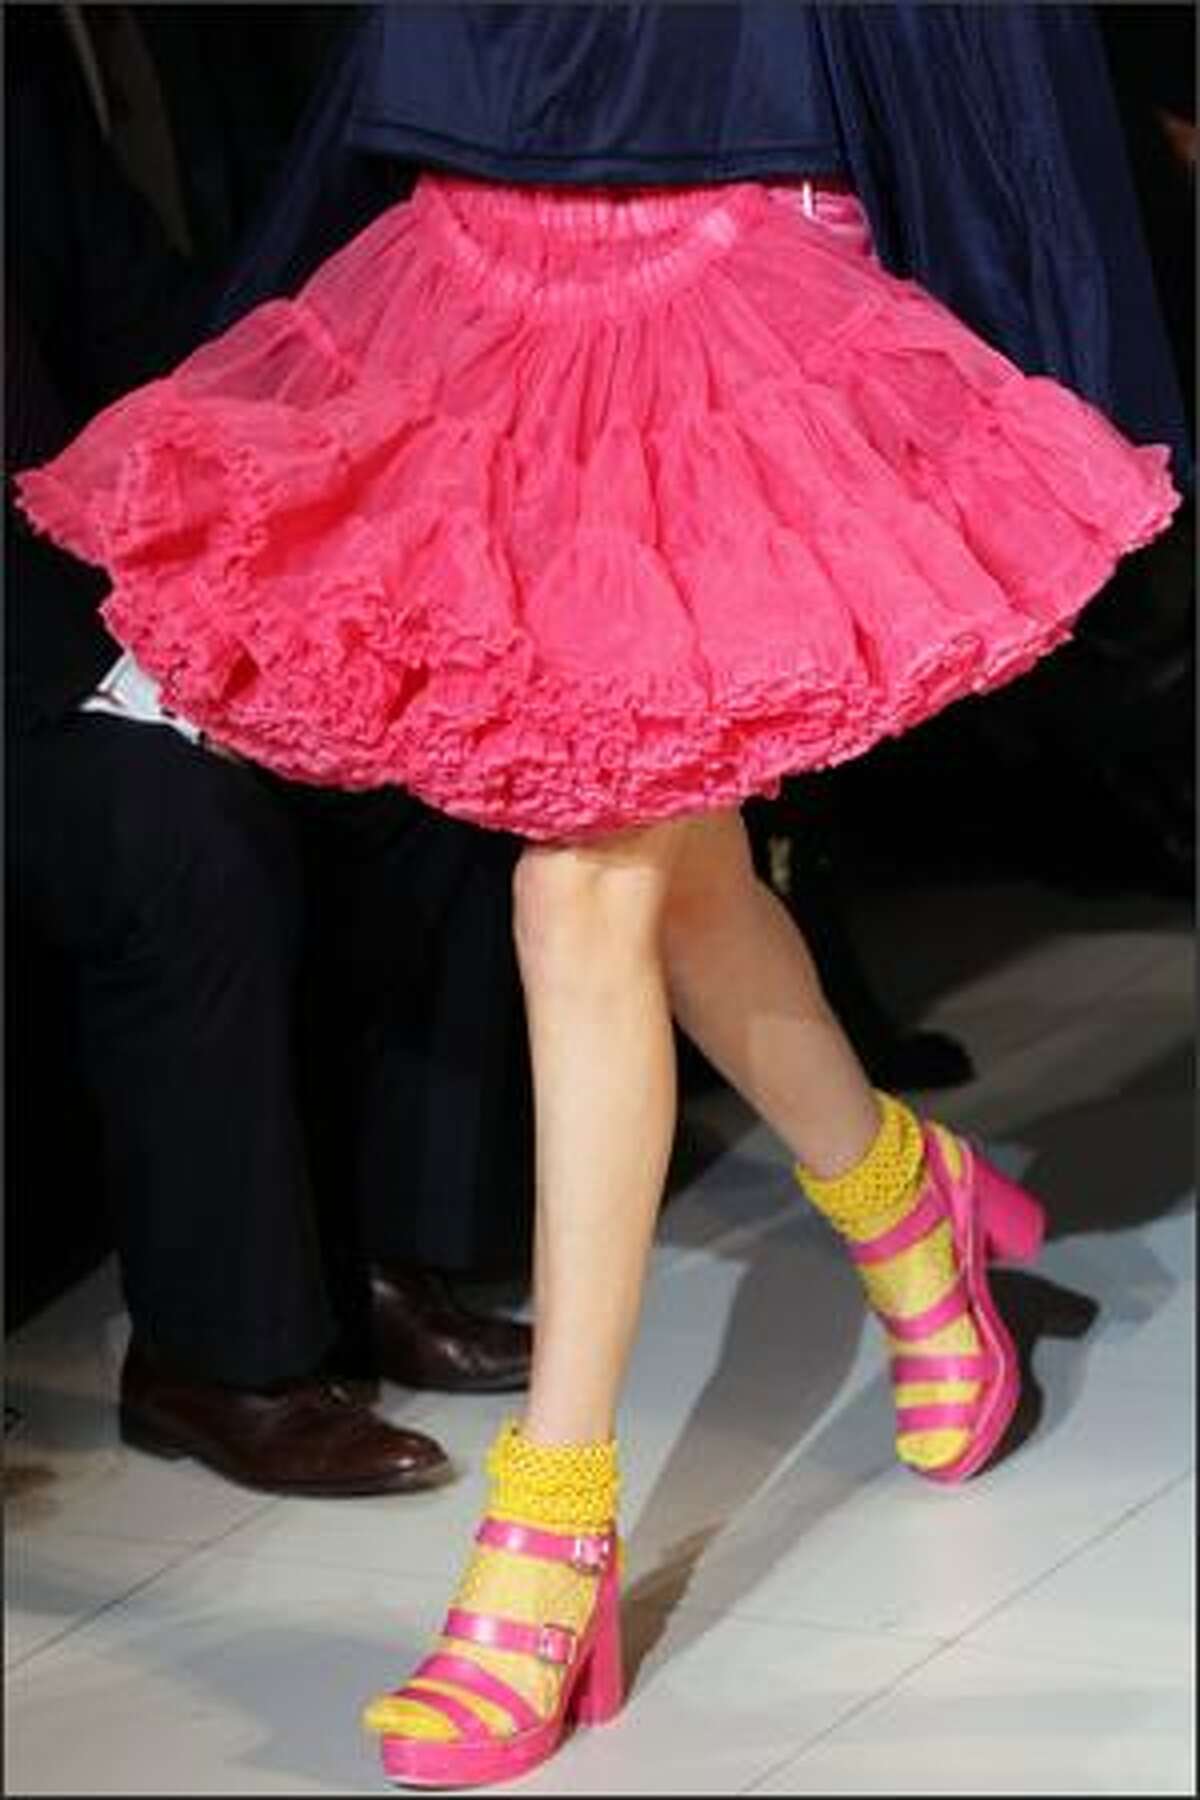 A model presents a creation by Comme des Garcons during the Spring/Summer 2008 ready-to-wear collection show in Paris.